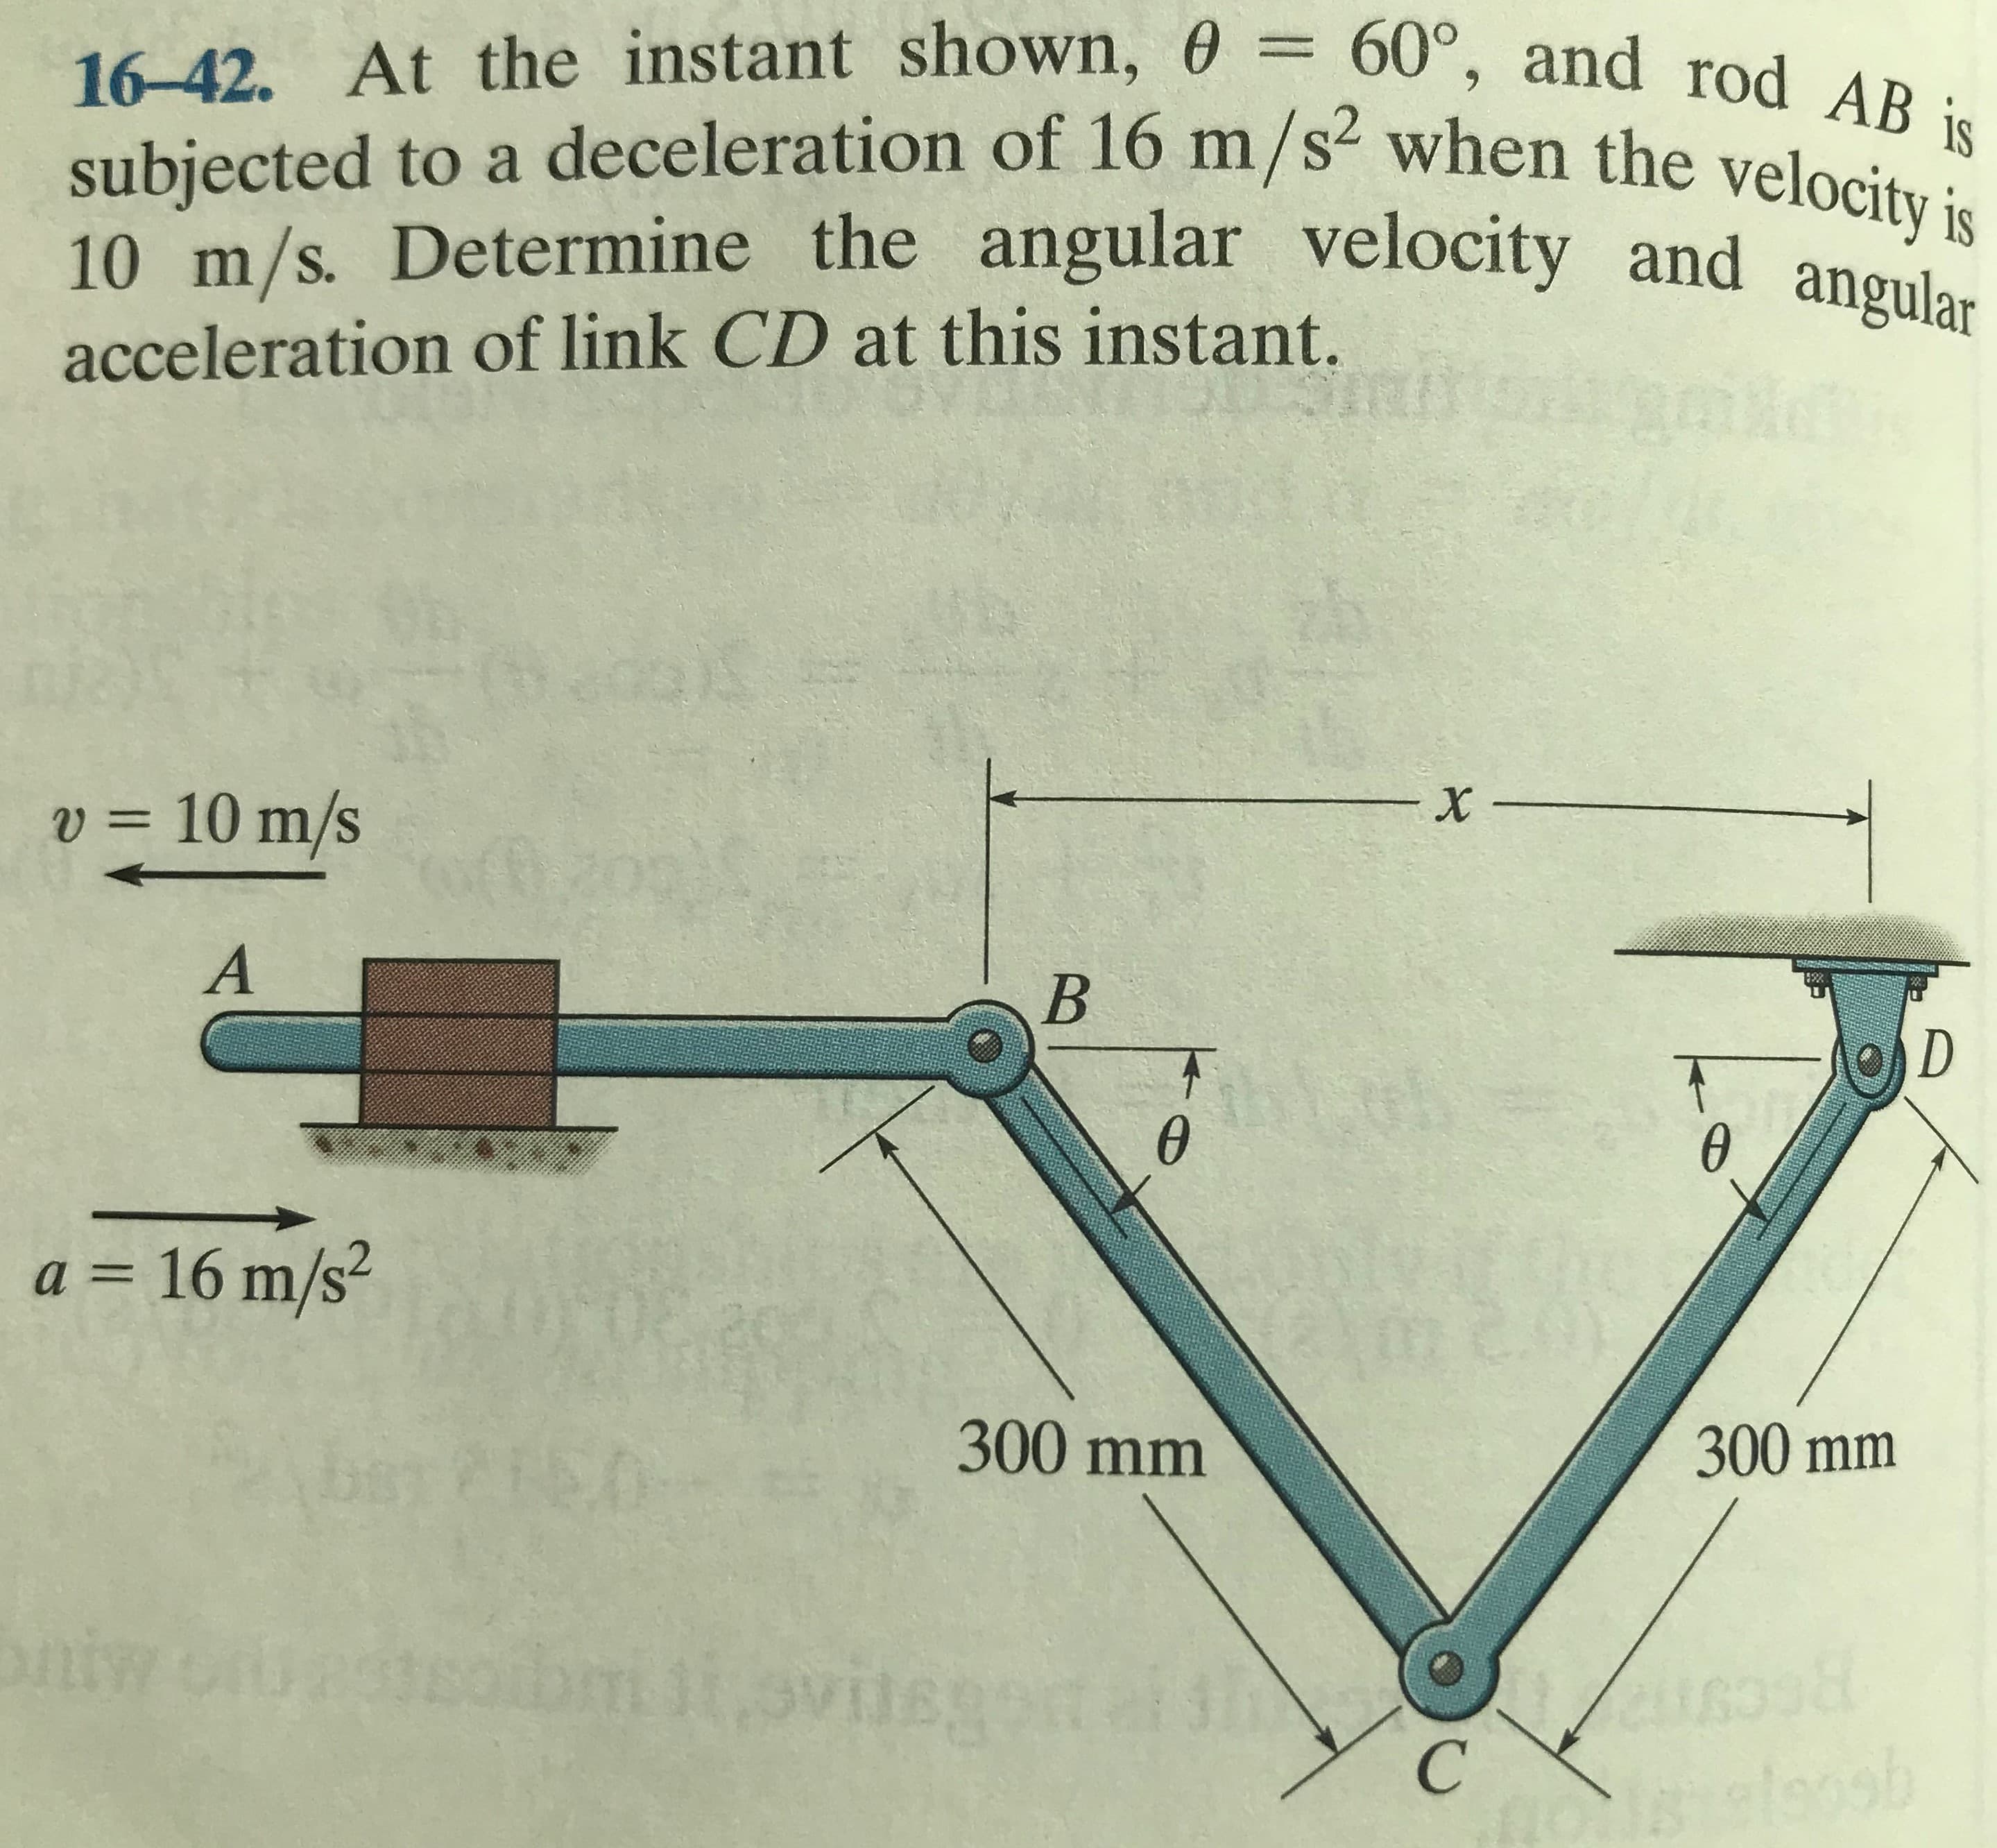 16-42. At the instant shown, 0 = 60°, and rod AB is
6.
subjected to a deceleration of 16 m/s when the veloc
10 m/s. Determine the angular velocity and angular
acceleration of link CD at this instant.
v = 10 m/s
%3D
2.
a = 16 m/s²
%3D
300 mm
300 mm
niw
mi,ovi
